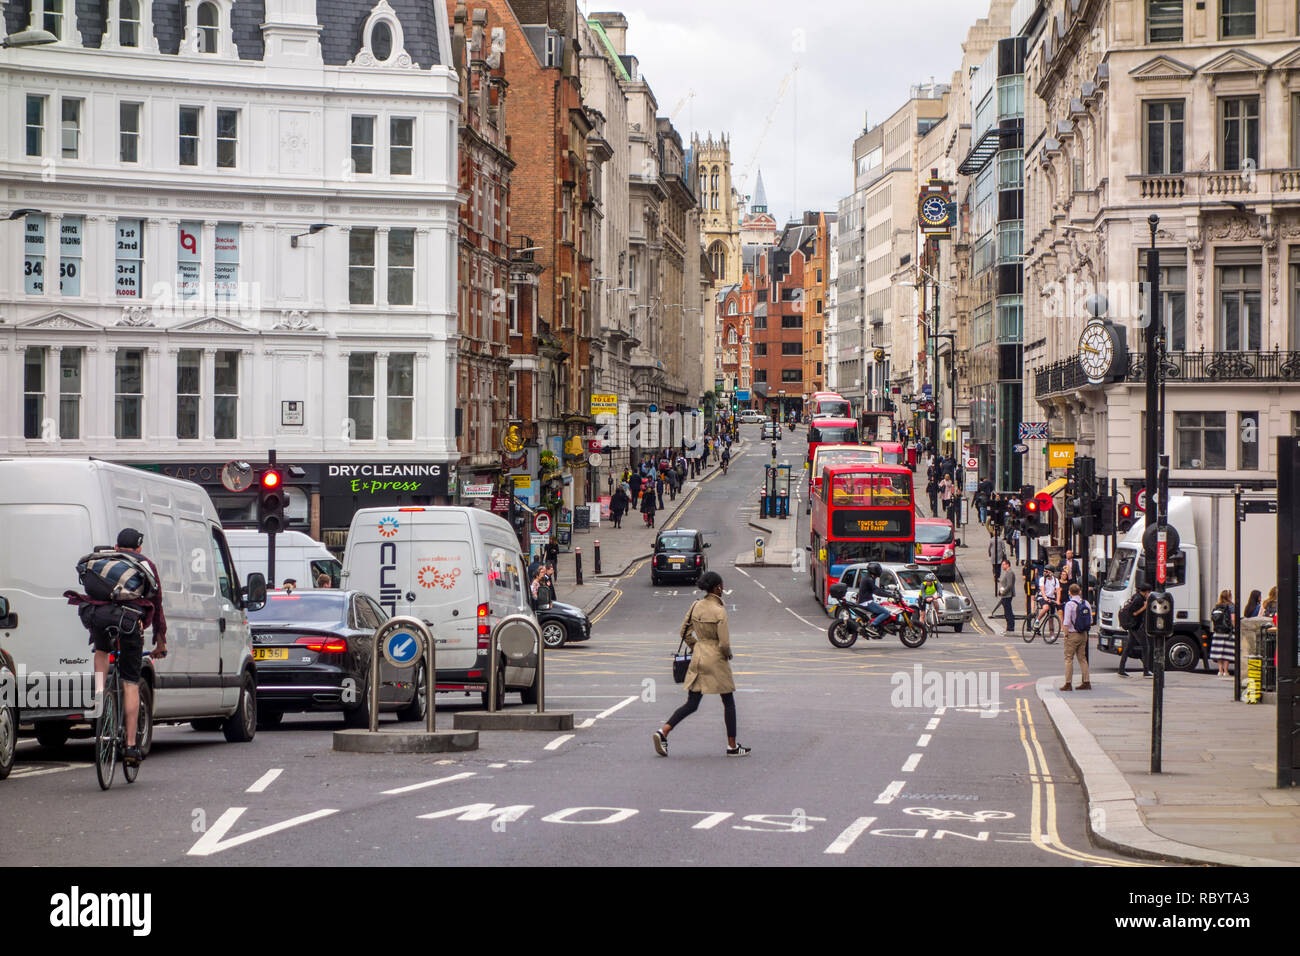 People on Ludgate Hill, looking towards Ludgate Circus and Fleet Street, City of London, UK Stock Photo